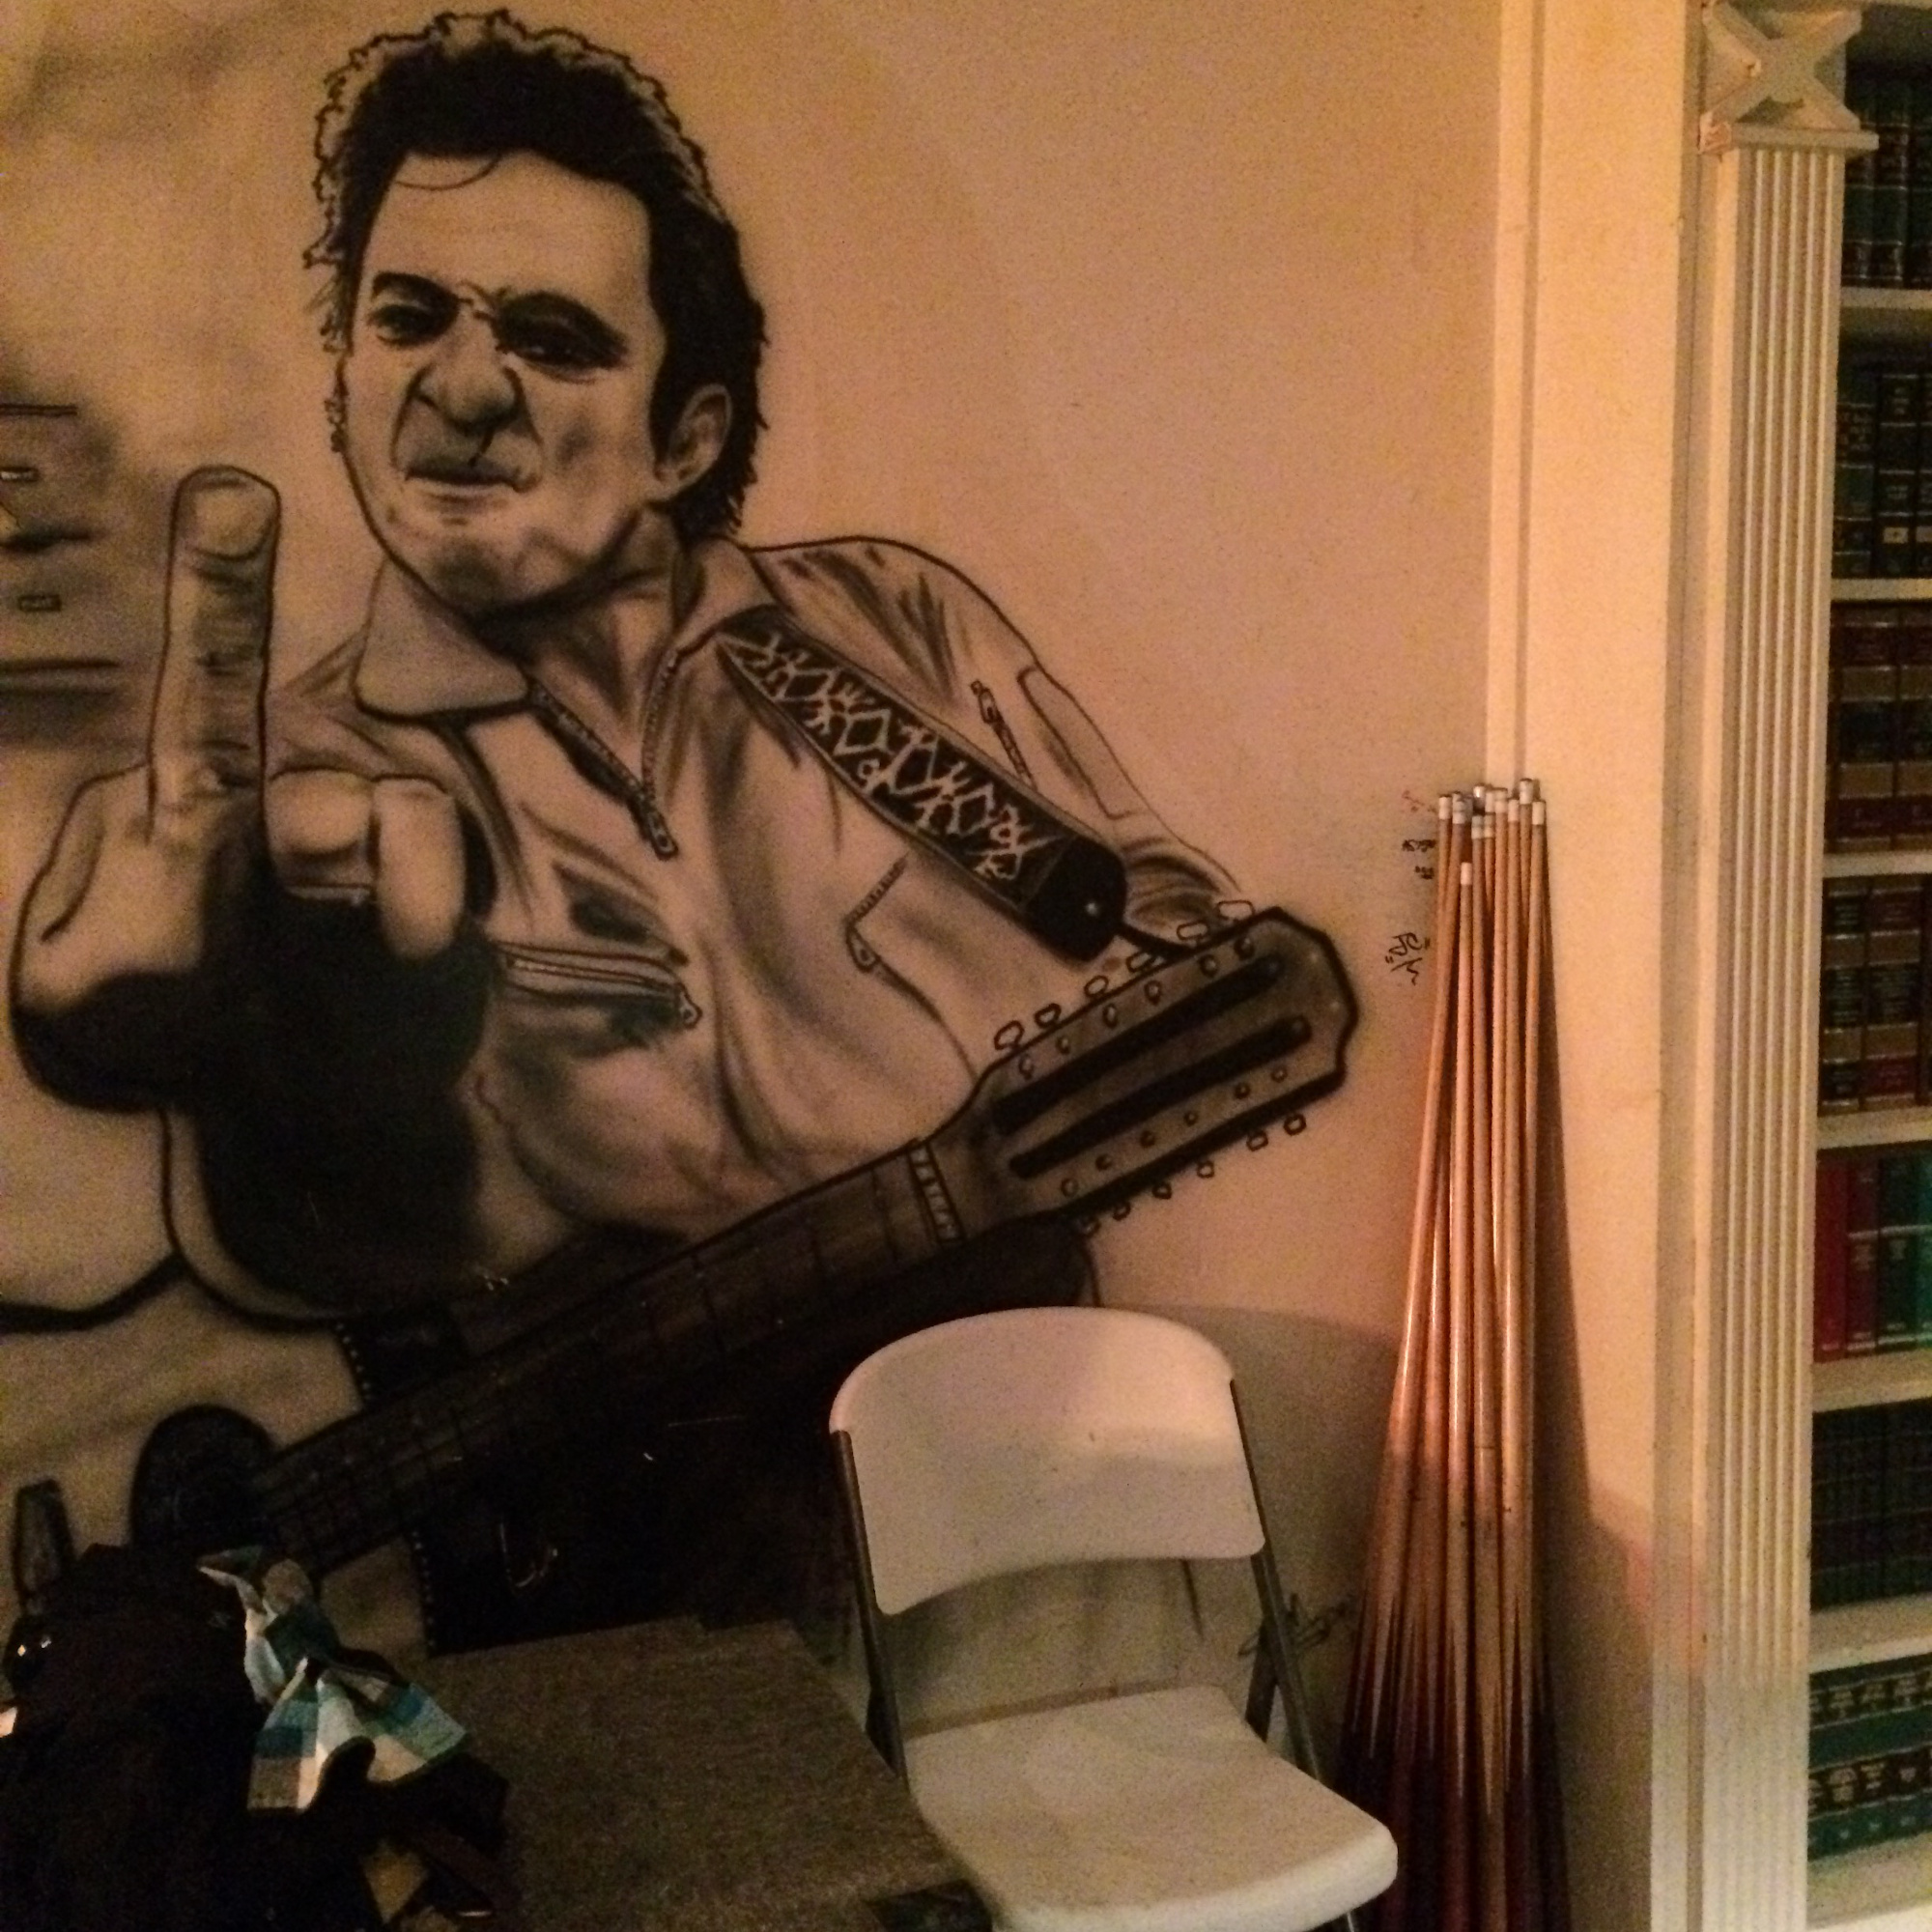 Johnny Cash Mural at the Blue Parrot Bar in Charleston West Virginia